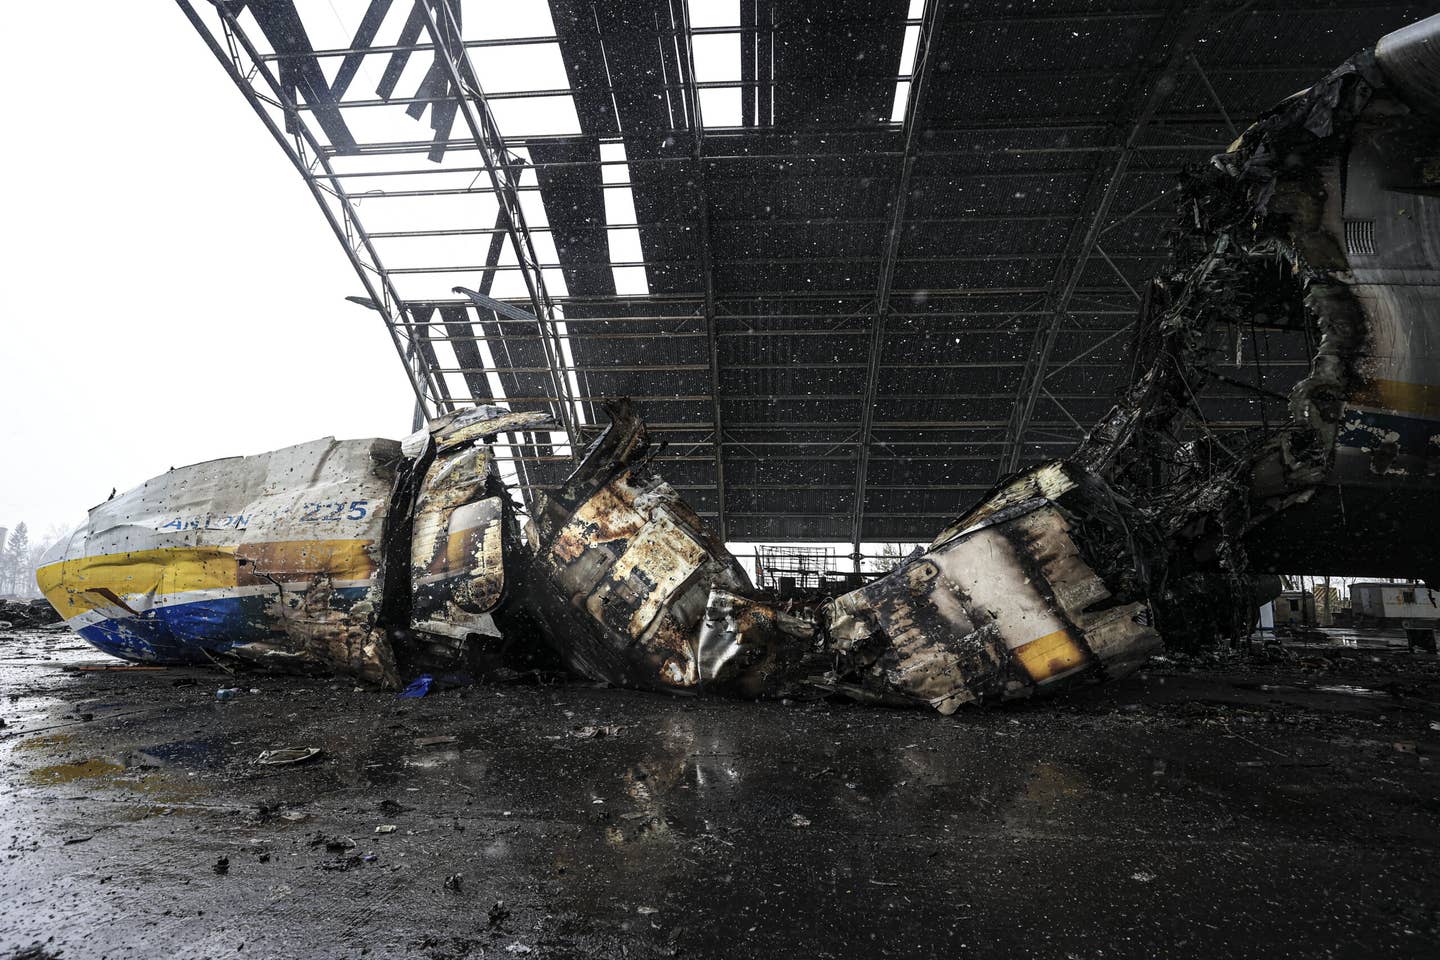 A view of the wreckage of the An-225 Mriya cargo plane, the world's biggest aircraft, destroyed by Russian shelling as Russia's attack on Ukraine continues, in a shelter at Hostomel, Ukraine on April 3, 2022. <em>Photo by Metin Aktas/Anadolu Agency via Getty Images</em>